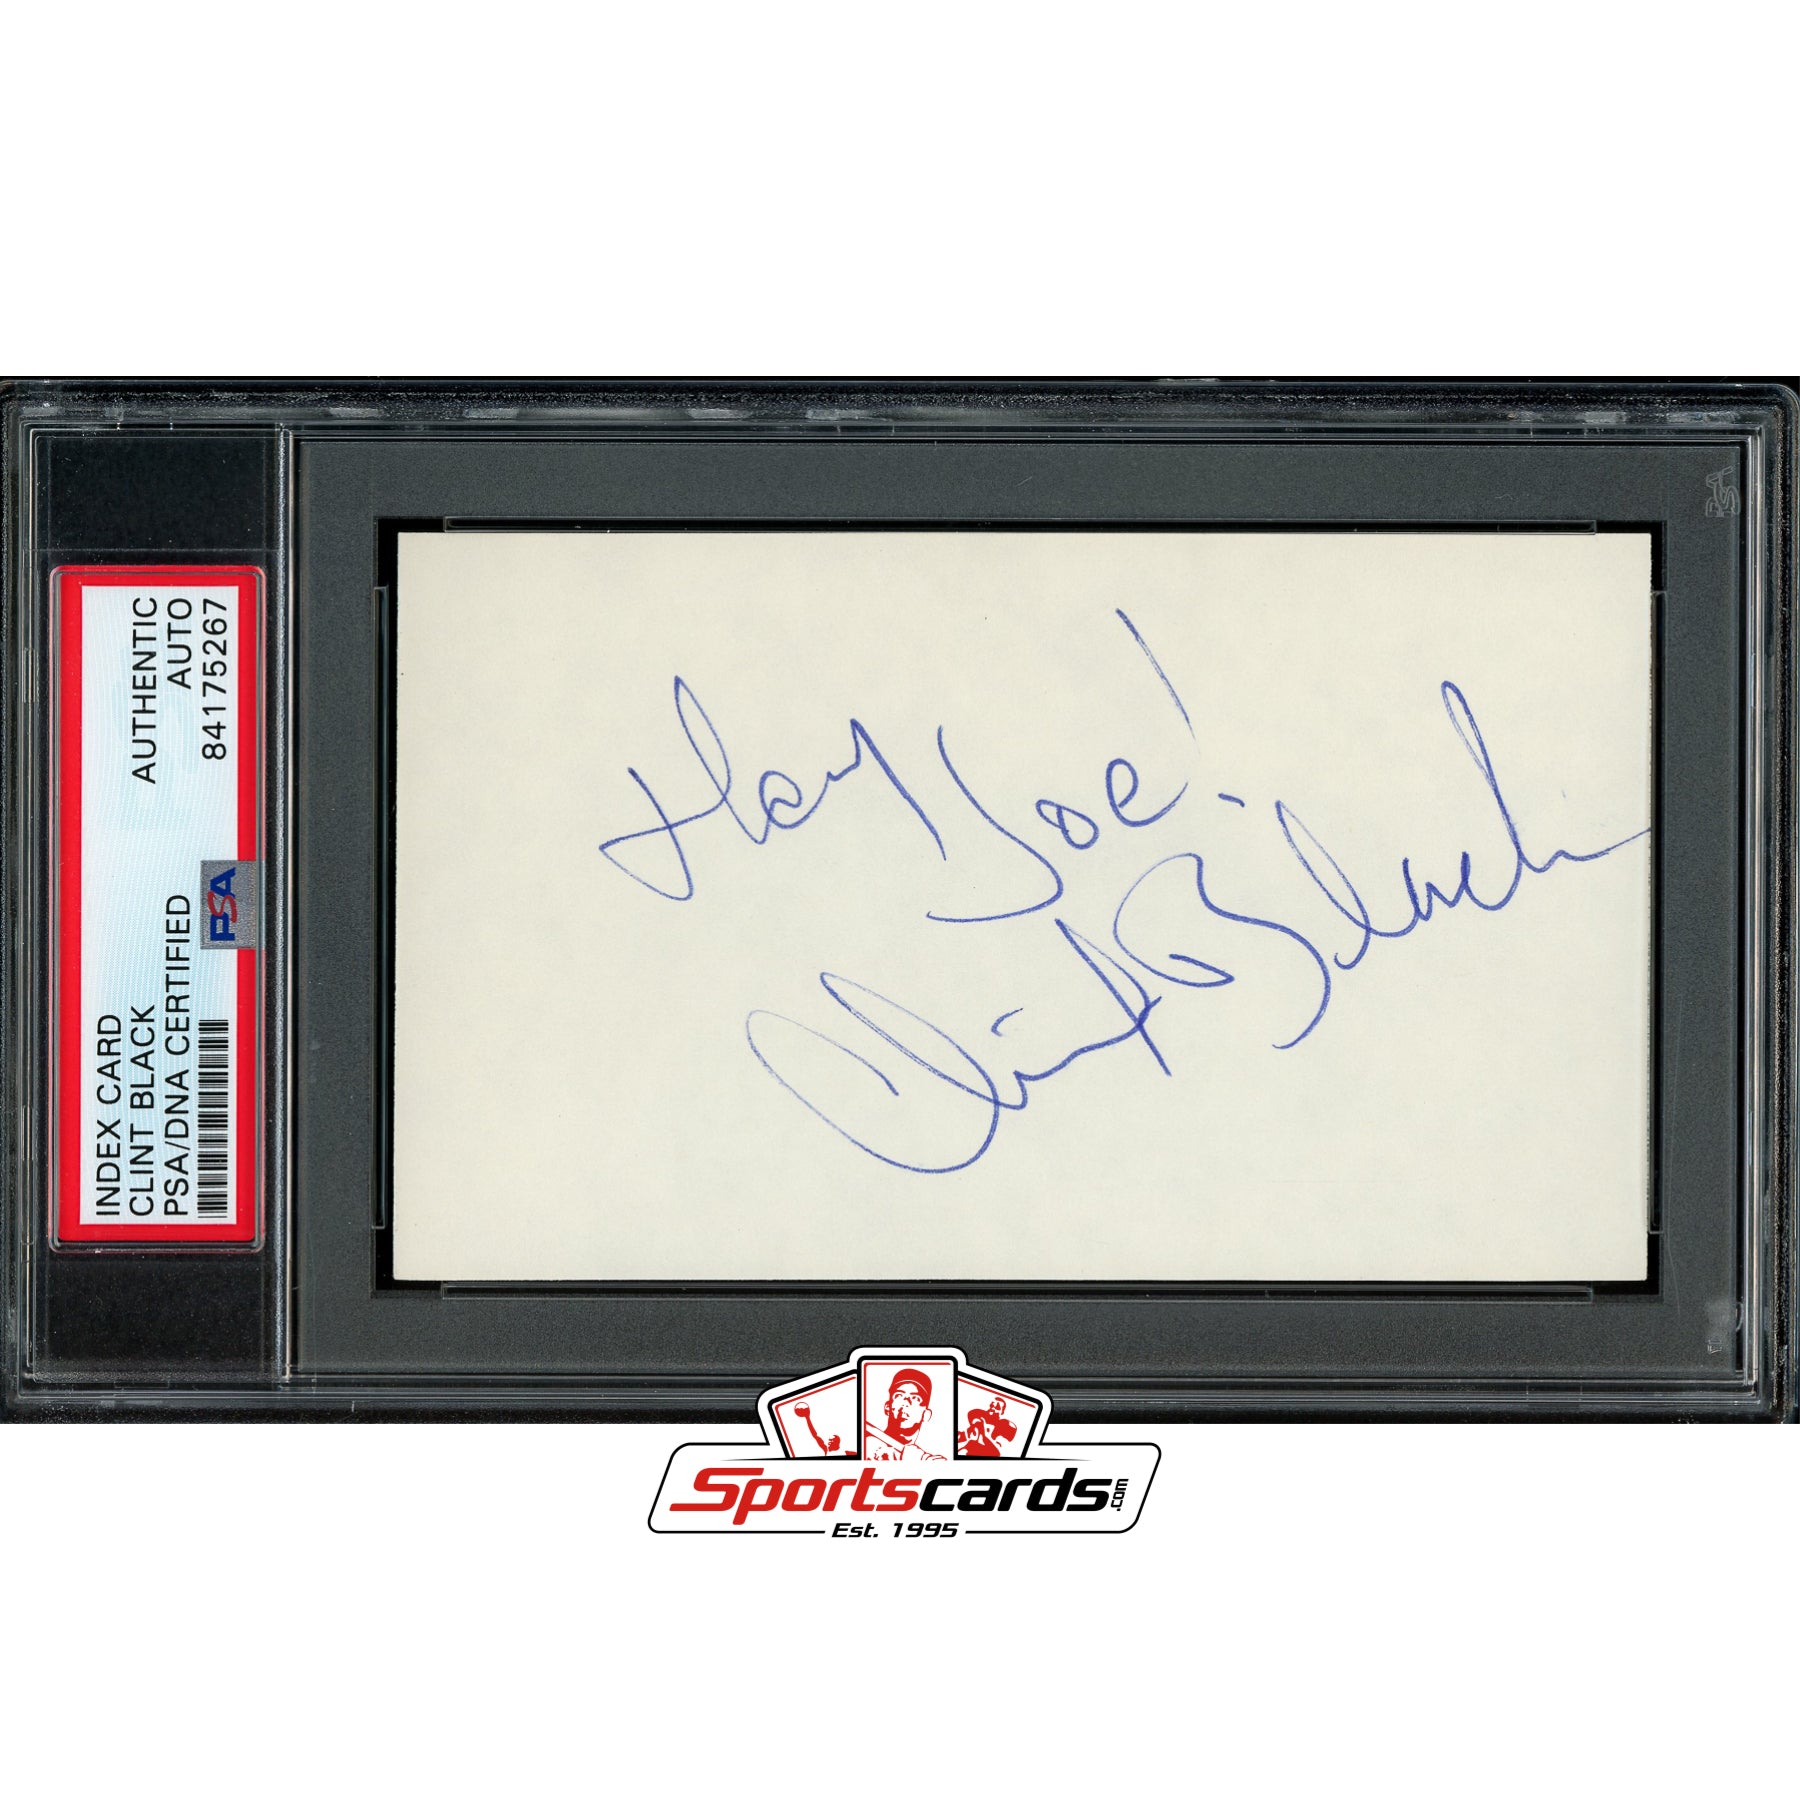 Clint Black Signed Auto 3x5 Index Card PSA/DNA Country Singer